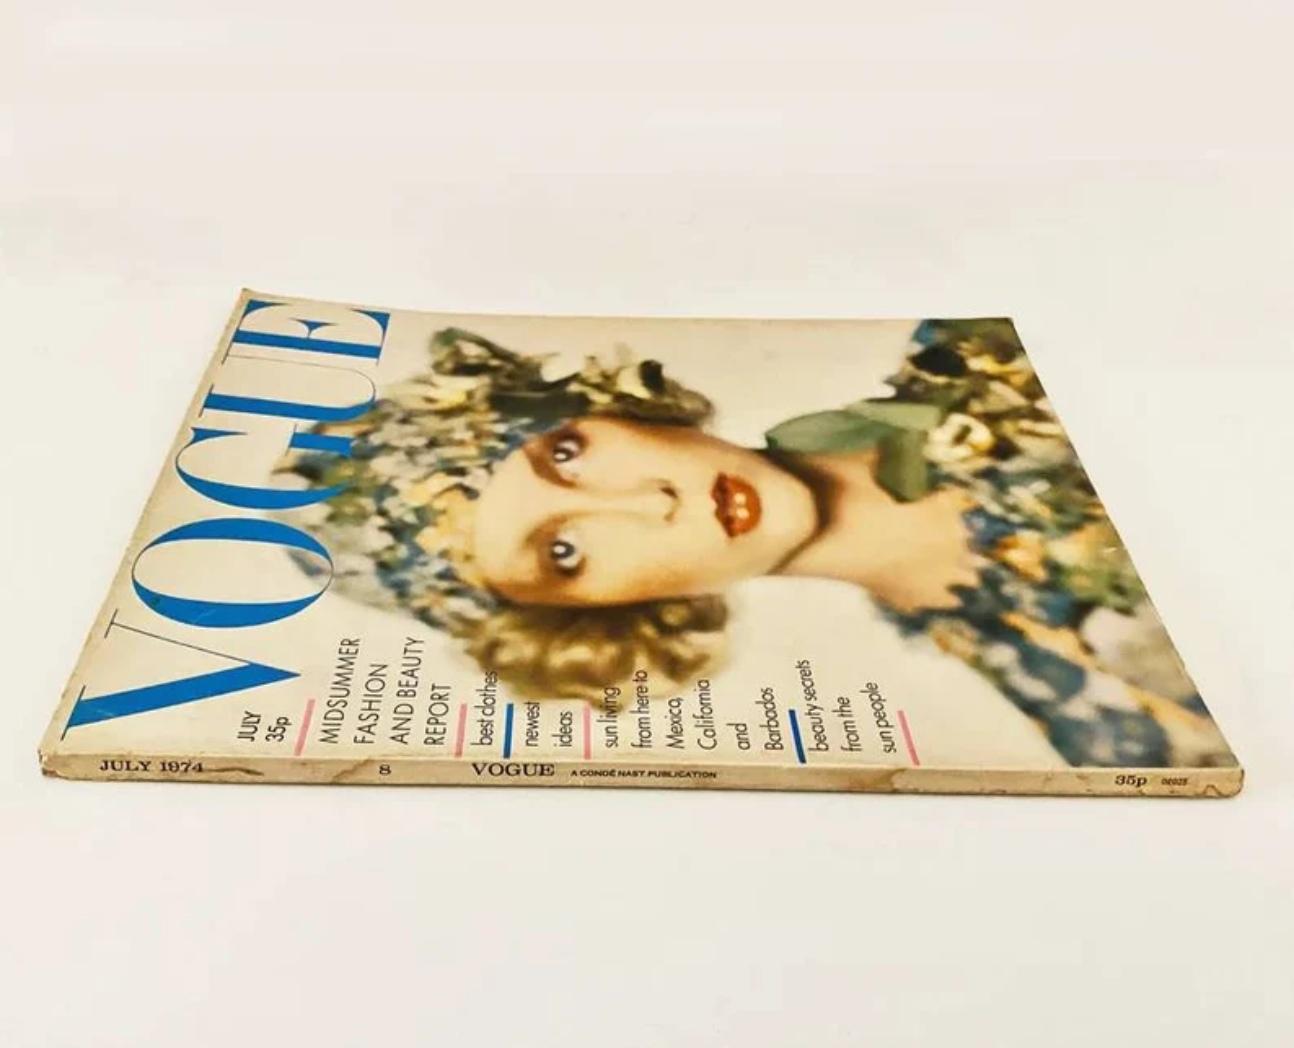 1974 VOGUE Magazine - Cover by David Bailey, 160 pages, in colour and black/white

On Cover: 